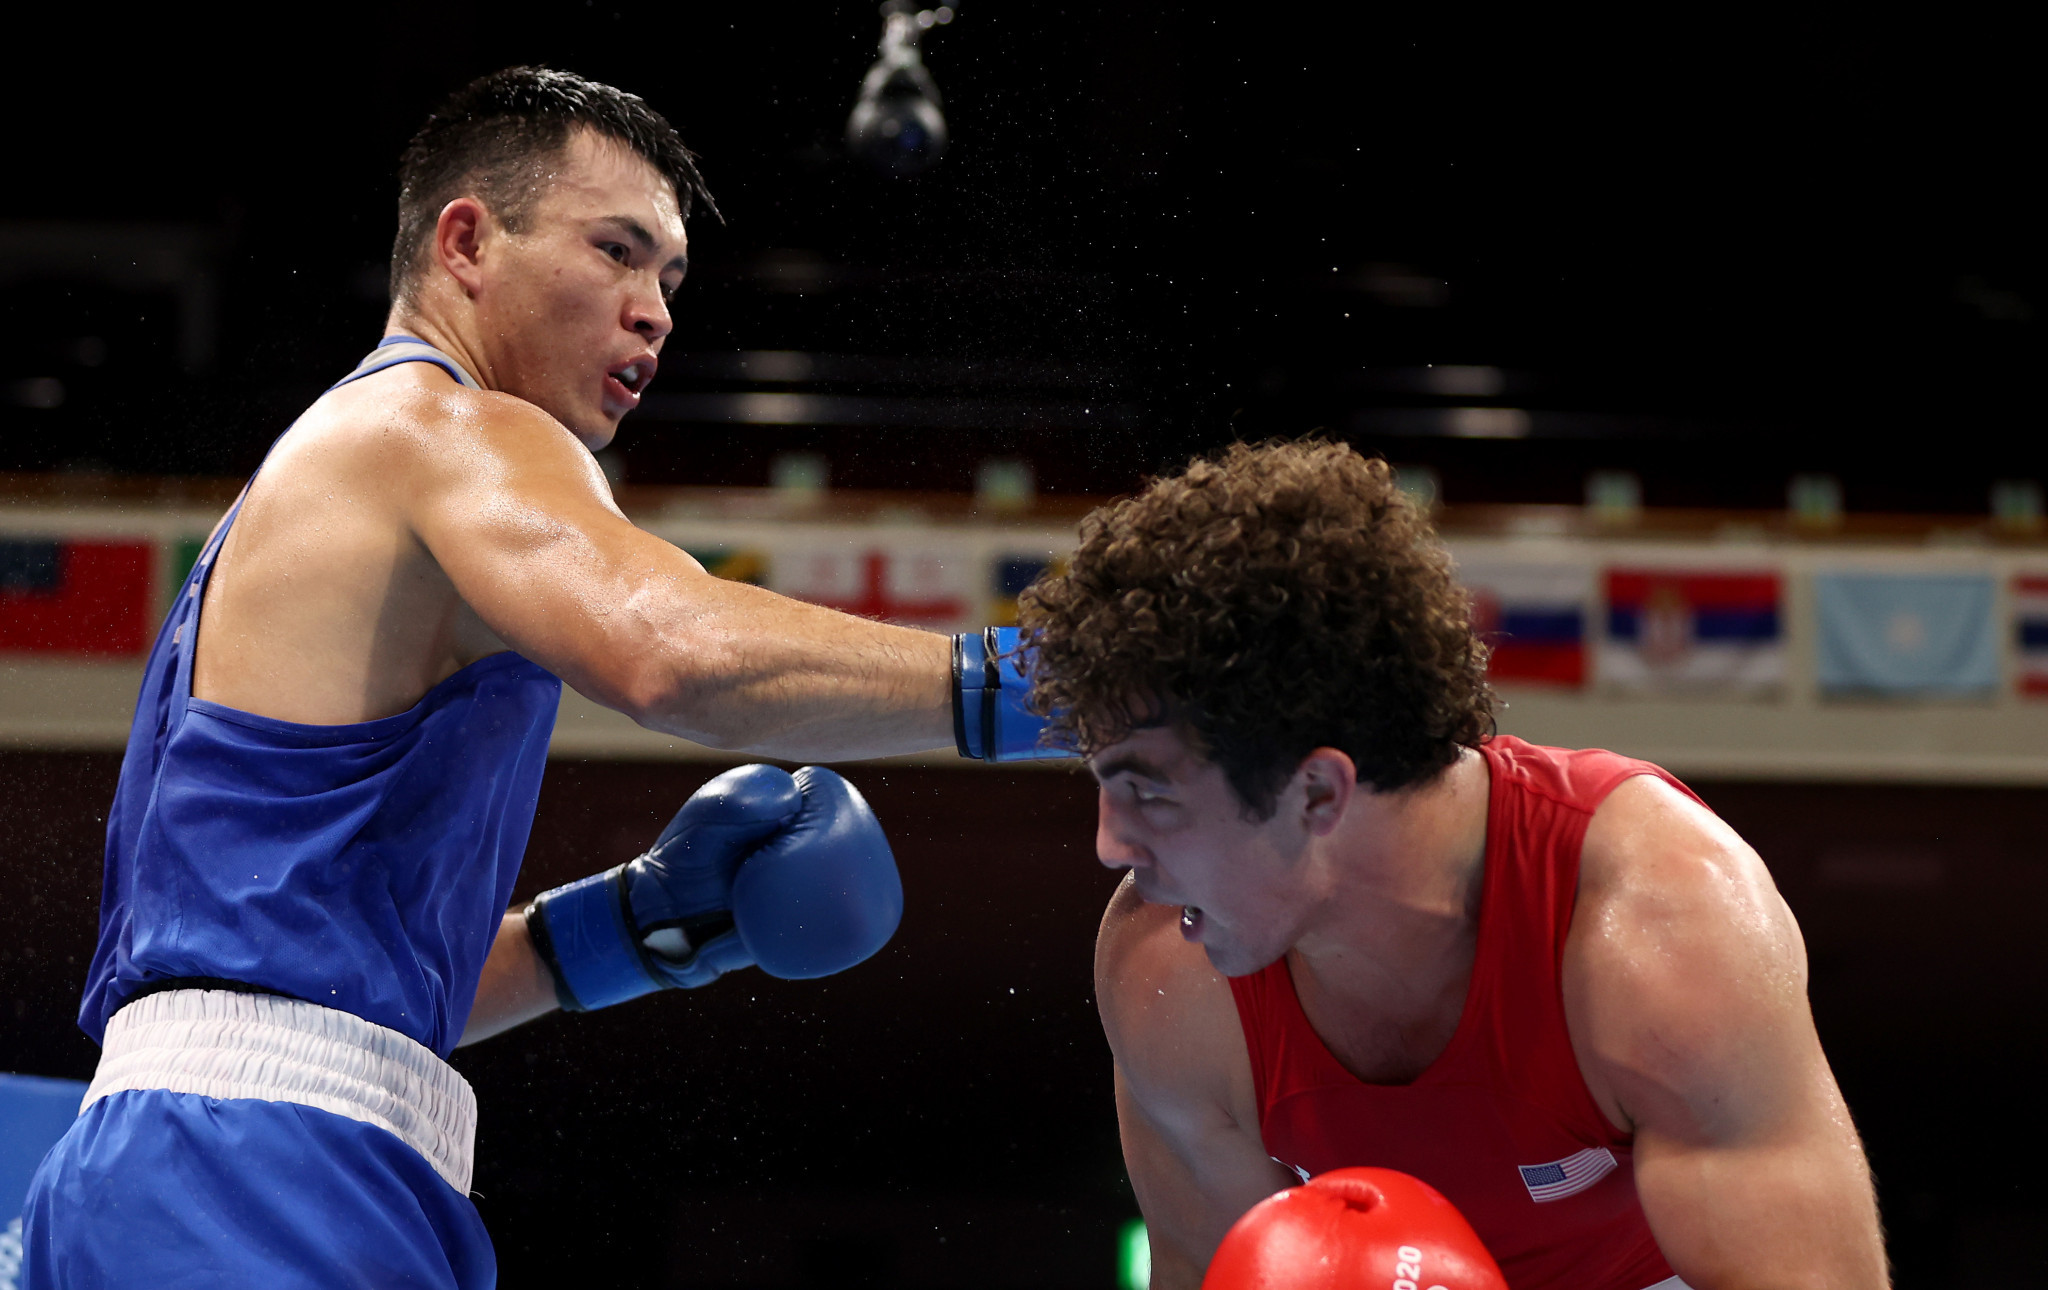 Boxing faces being removed from Paris 2024 programme after IBA renews Gazprom contract, IOC warns